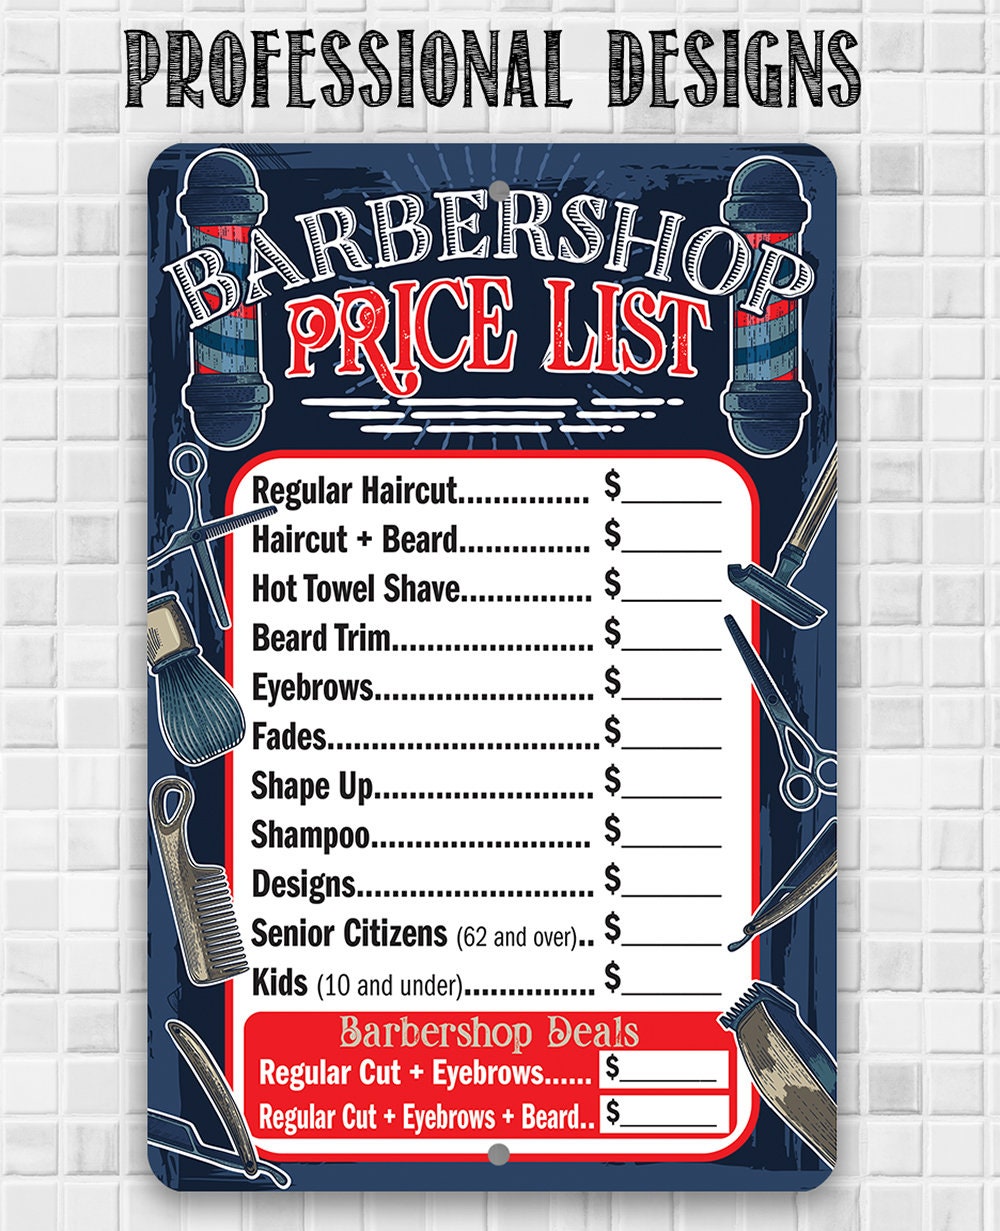 Barbershop Price List - 8" x 12" or 12" x 18" Aluminum Tin Awesome Metal Poster Lone Star Art 